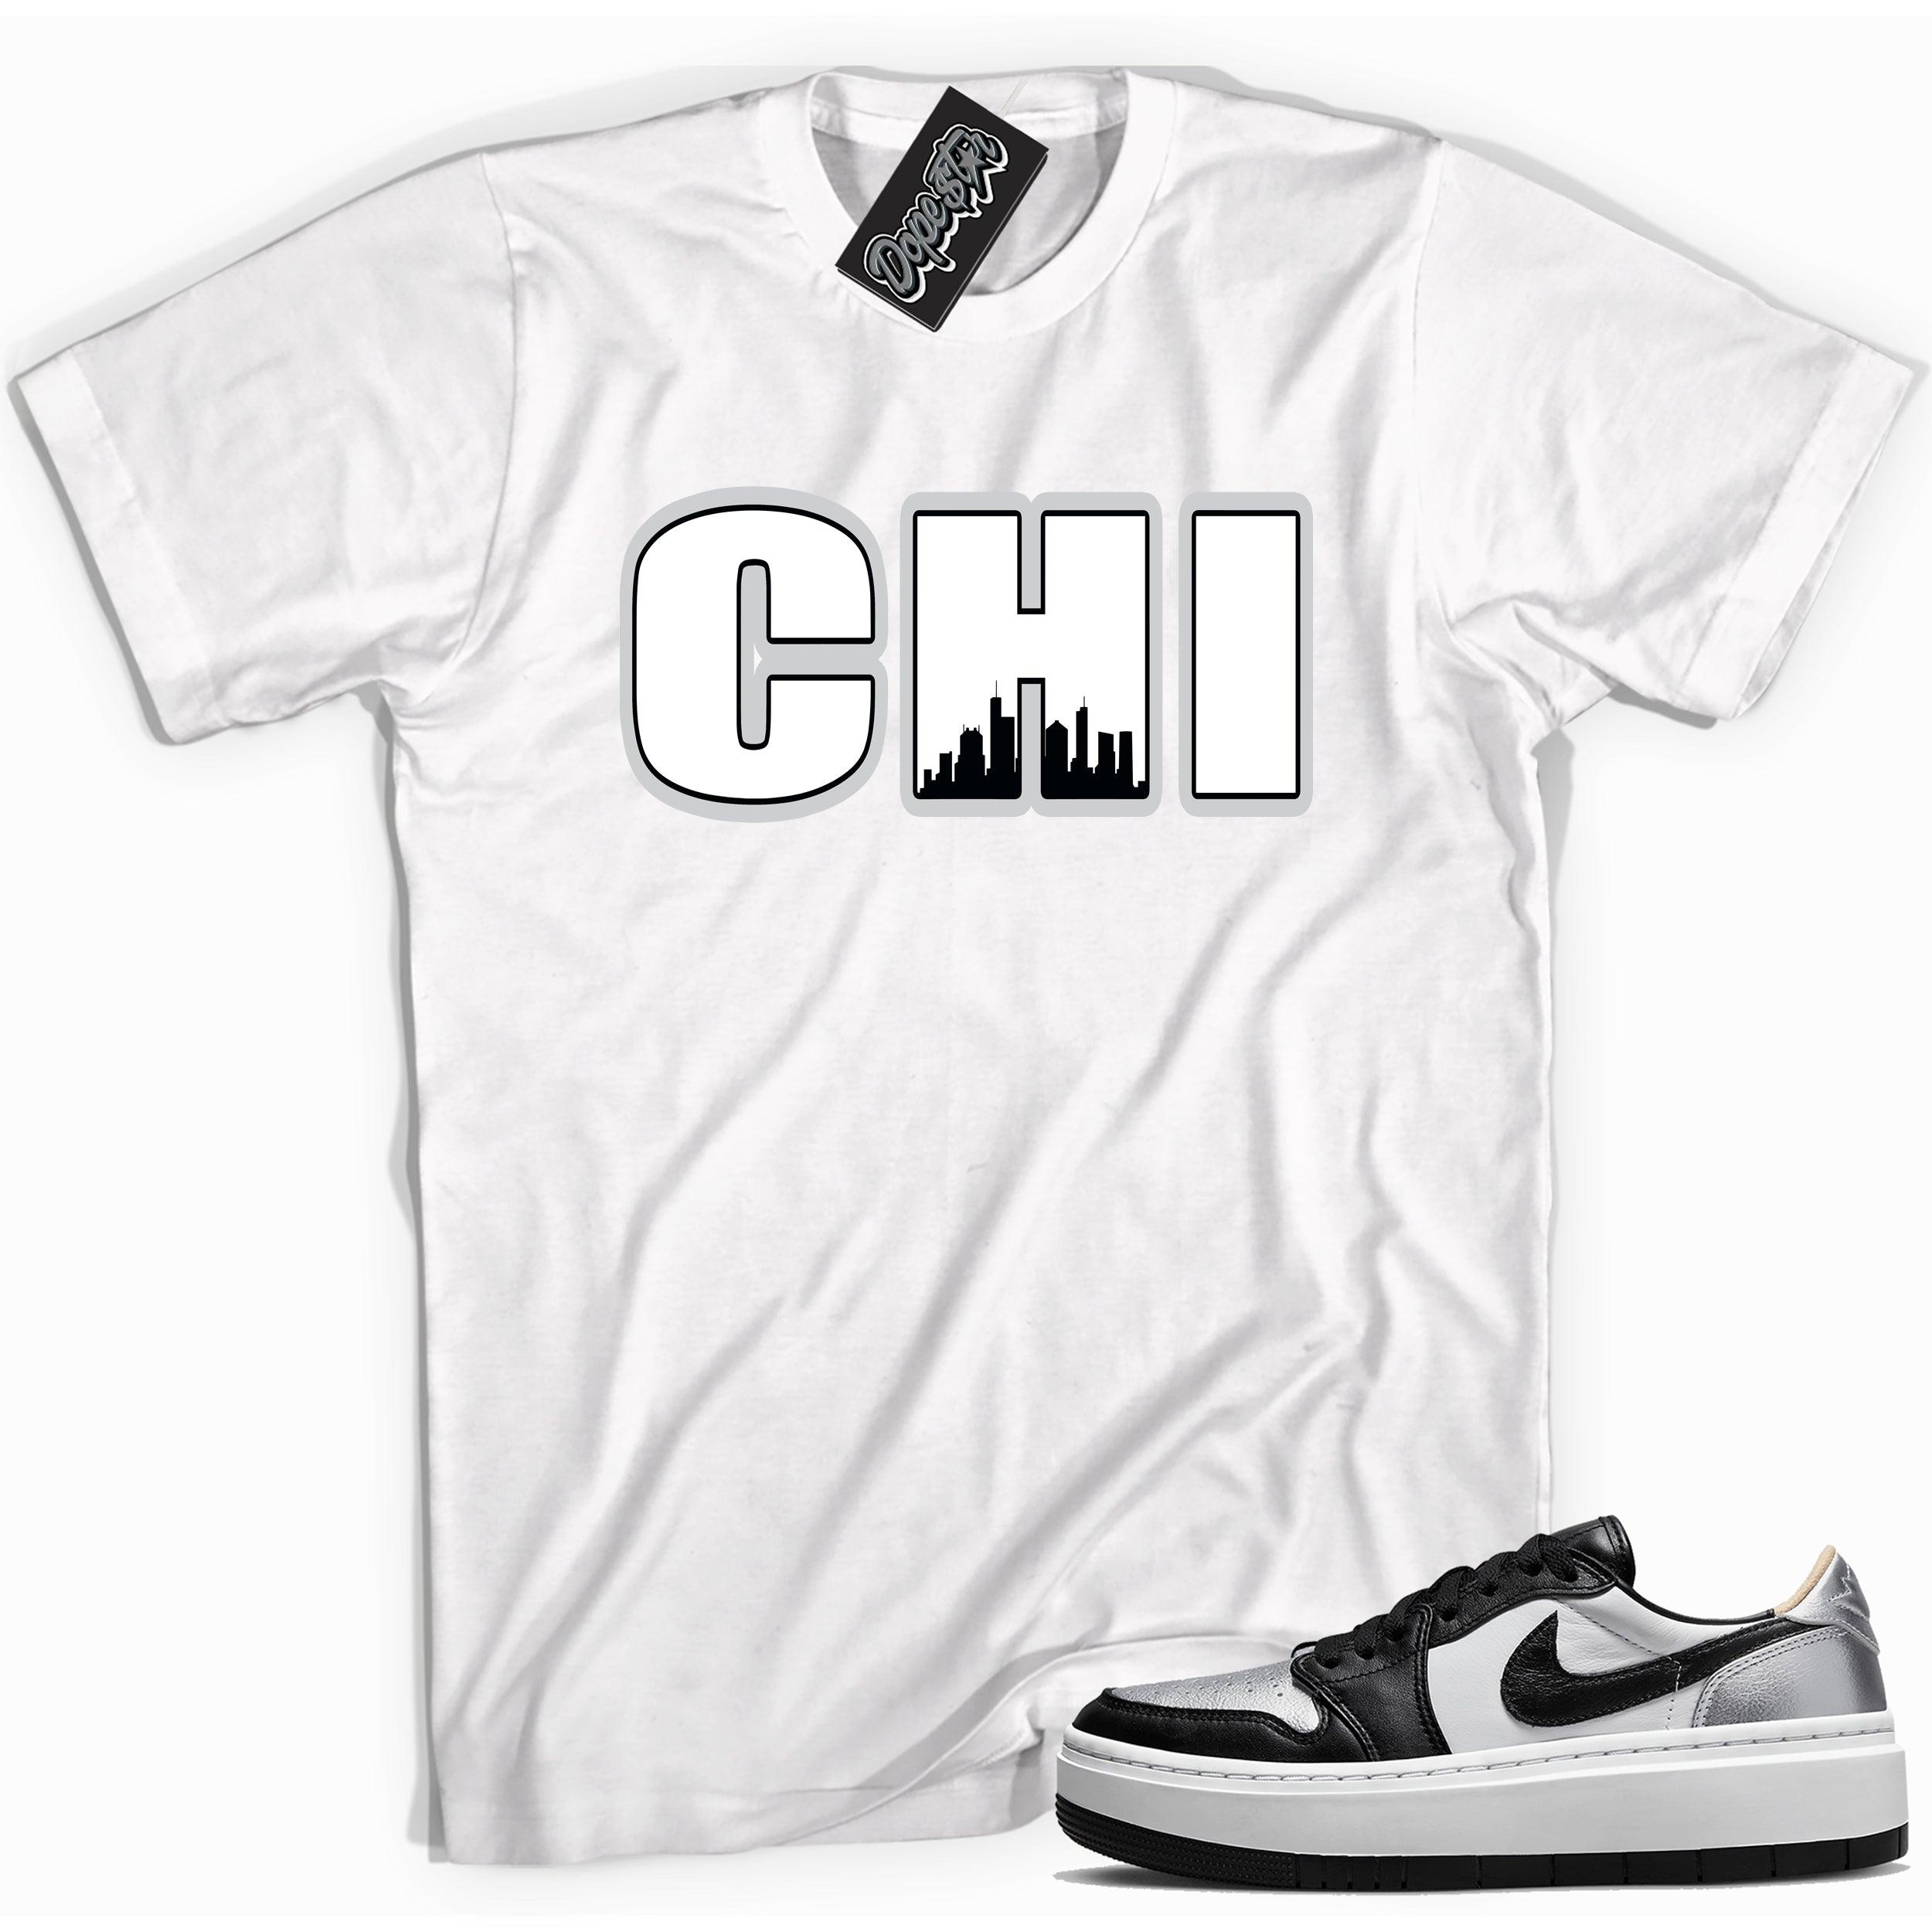 Cool white graphic tee with 'Chicago chi town' print, that perfectly matches Air Jordan 1 Elevate Low SE Silver Toe sneakers.